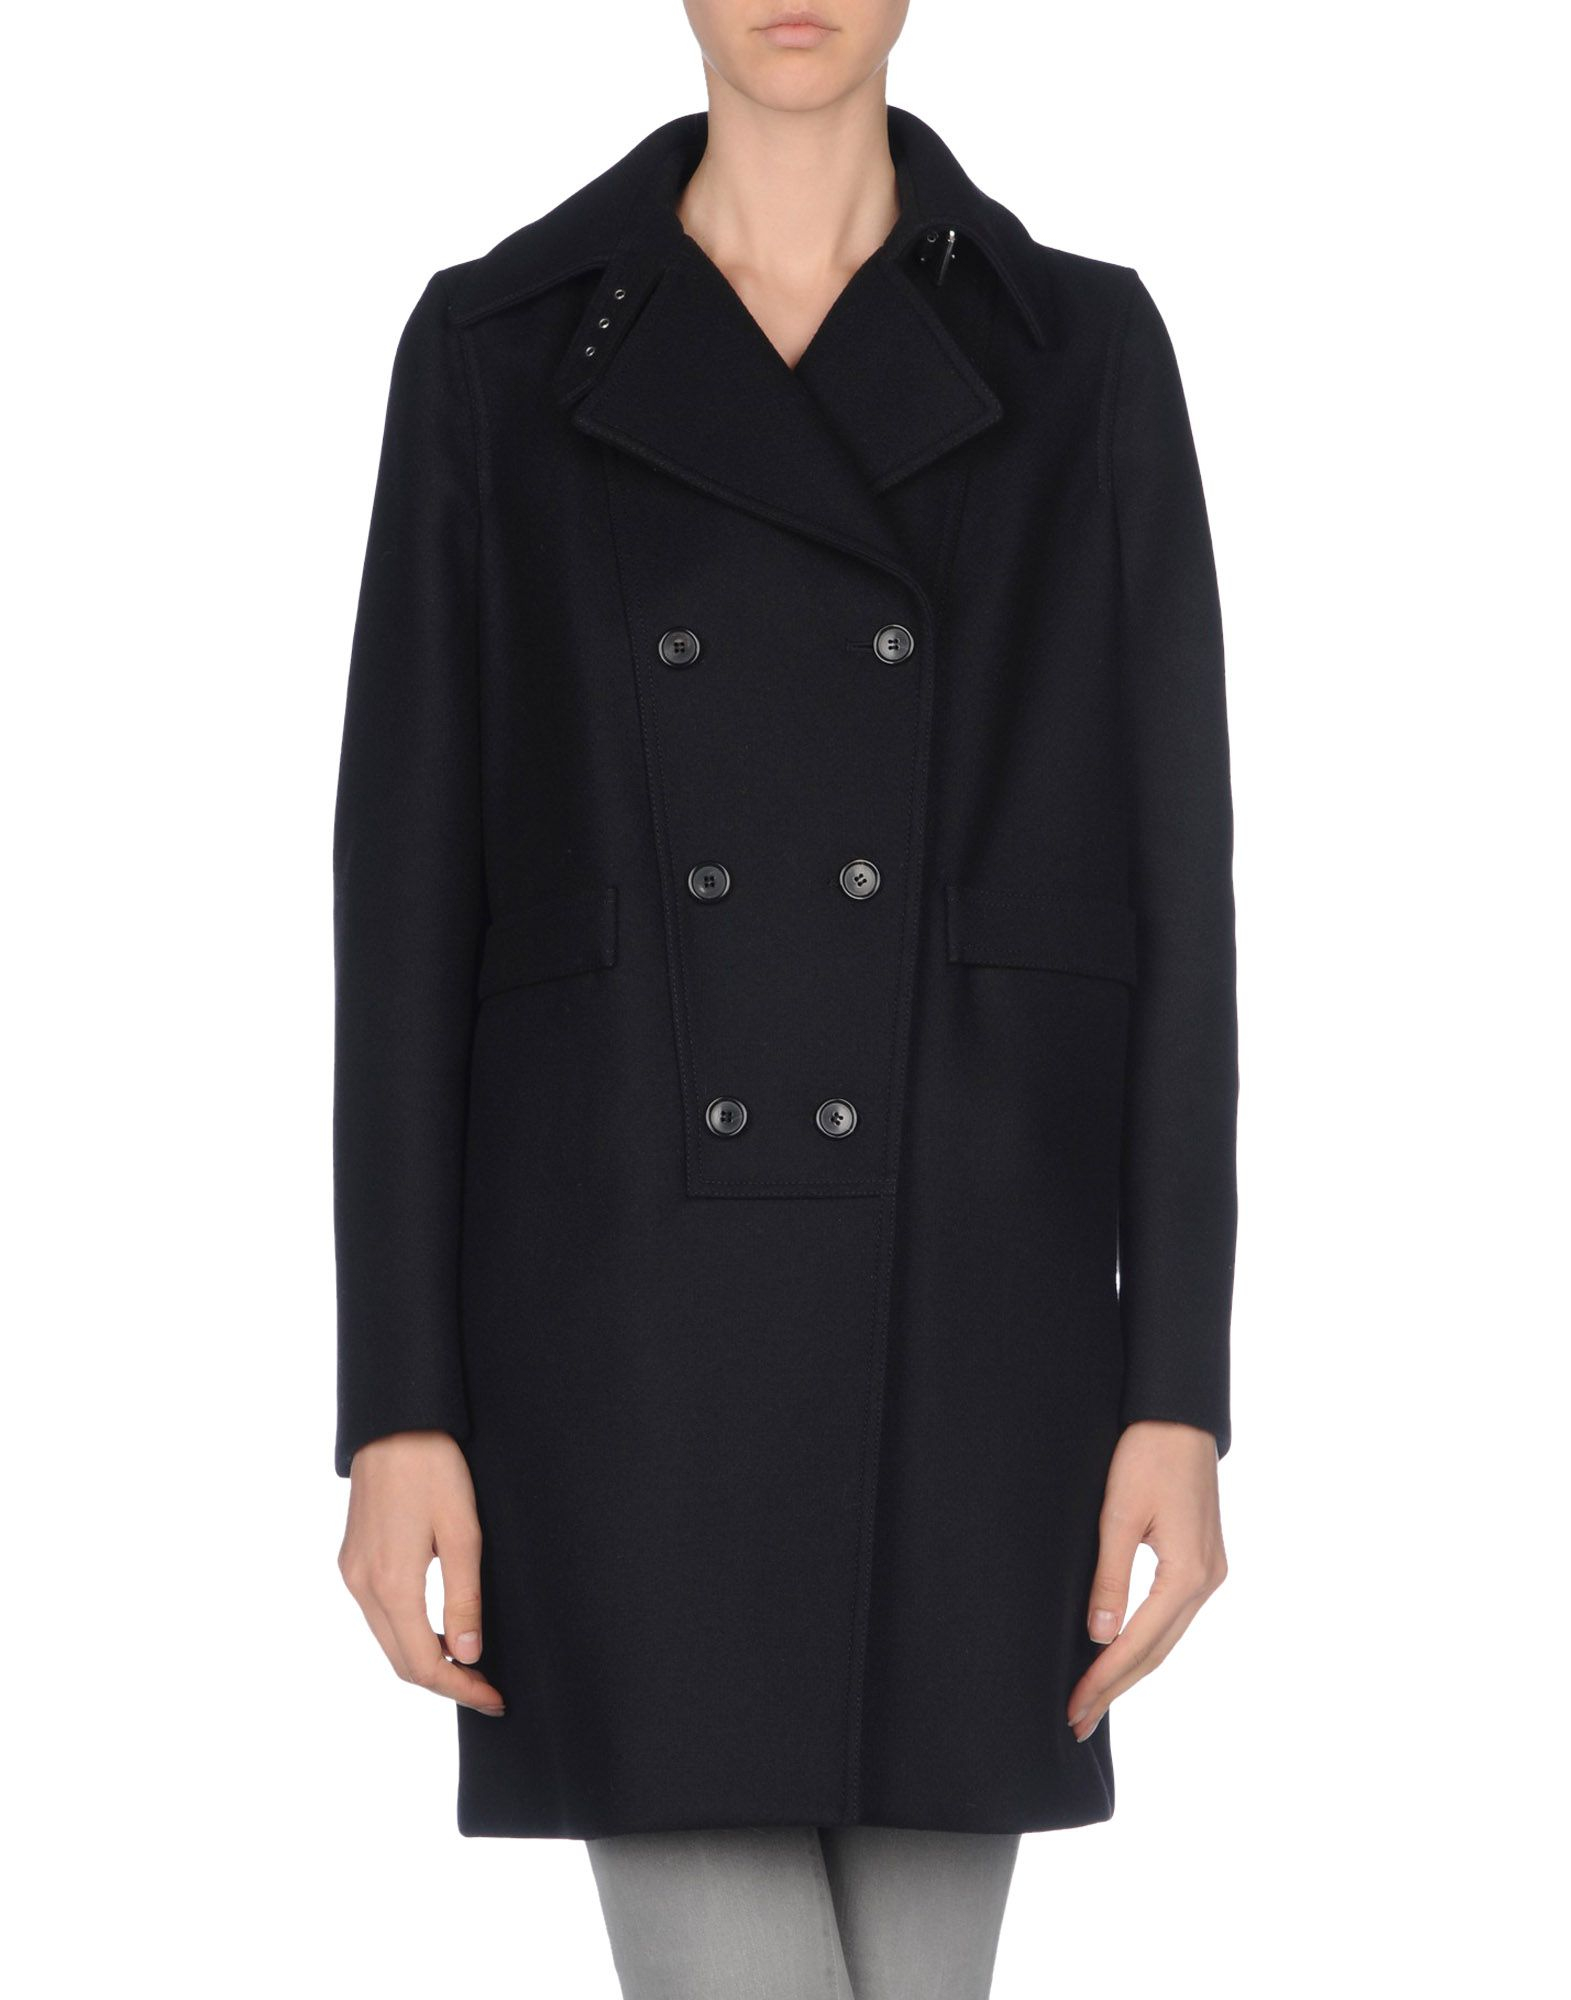 Lyst - Givenchy Coat in Black